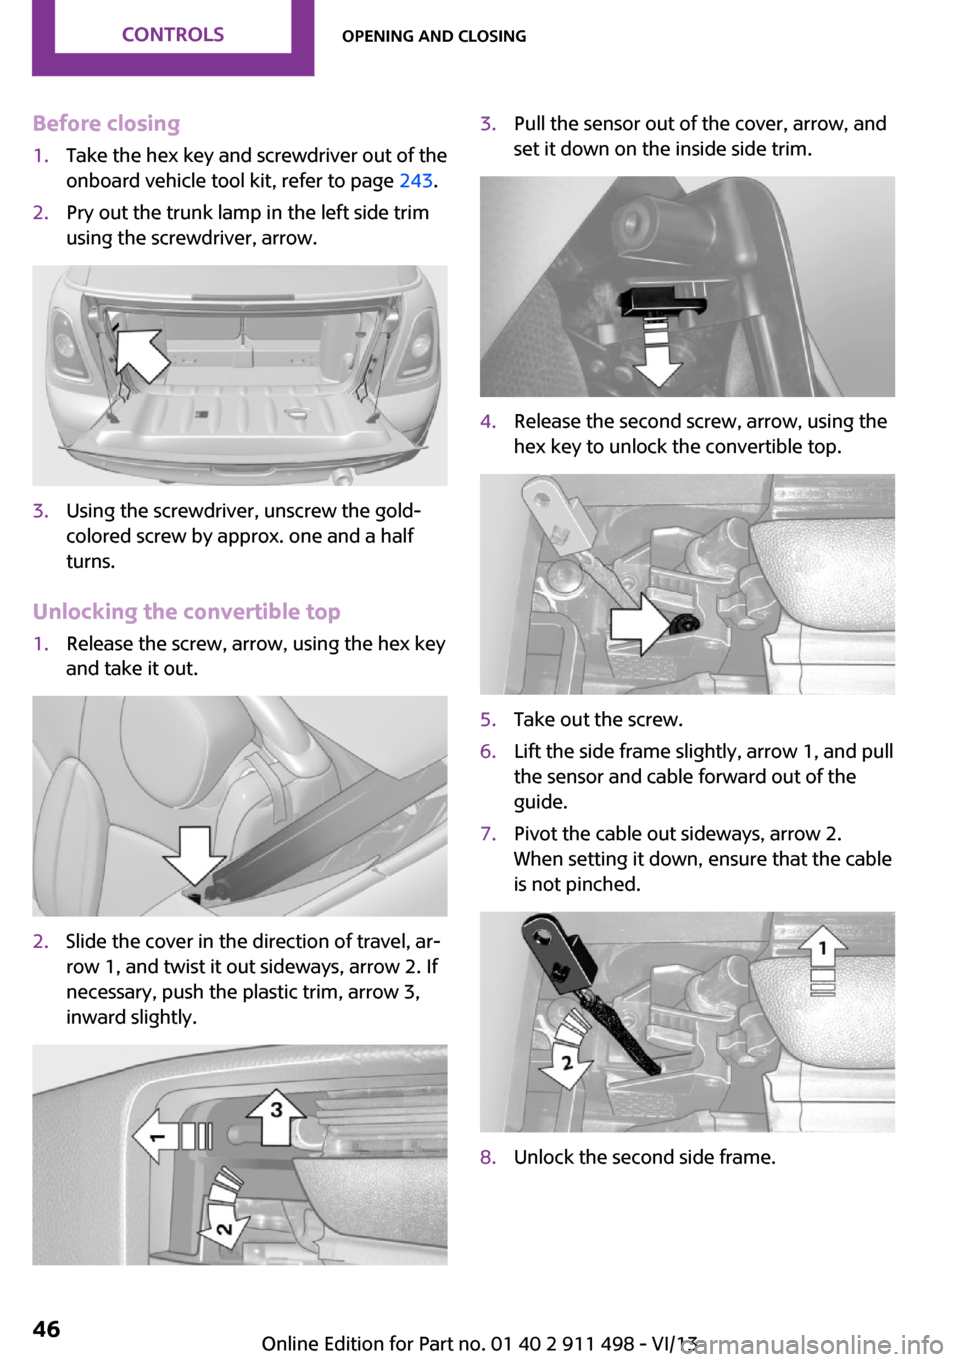 MINI Roadster 2014  Owners Manual (Mini Connected) Before closing1.Take the hex key and screwdriver out of the
onboard vehicle tool kit, refer to page  243.2.Pry out the trunk lamp in the left side trim
using the screwdriver, arrow.3.Using the screwdr